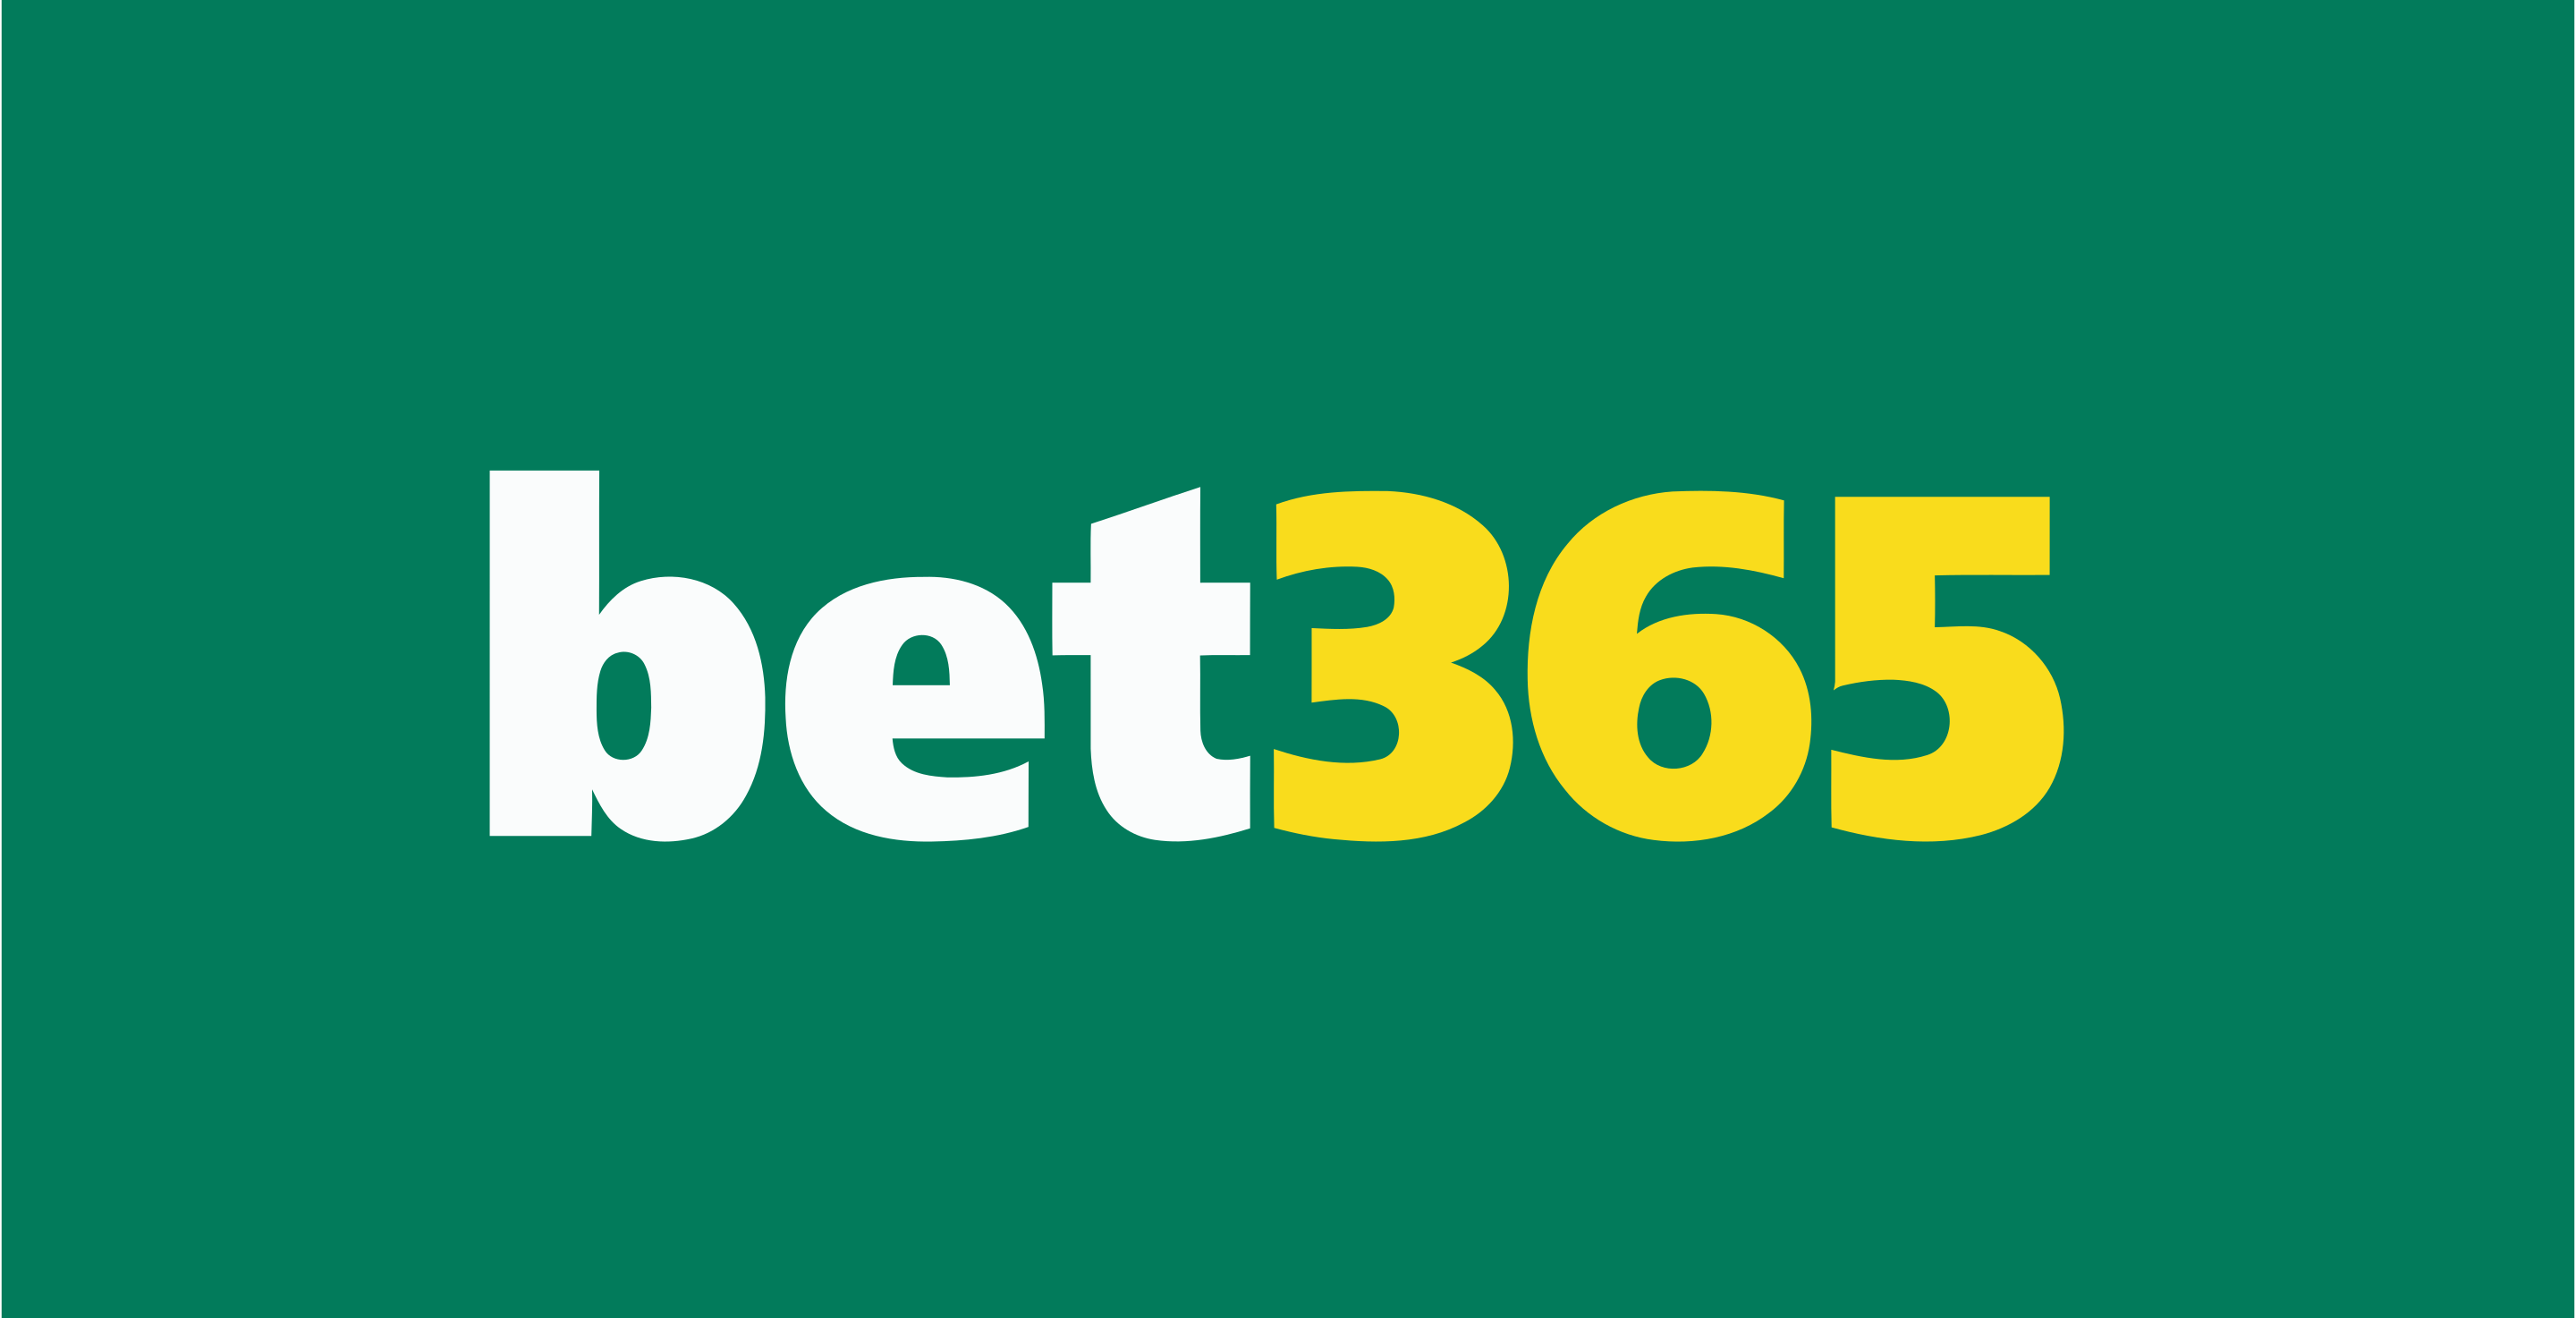 The official logo of Bet365, Coates’ gambling firm worth billions of dollars